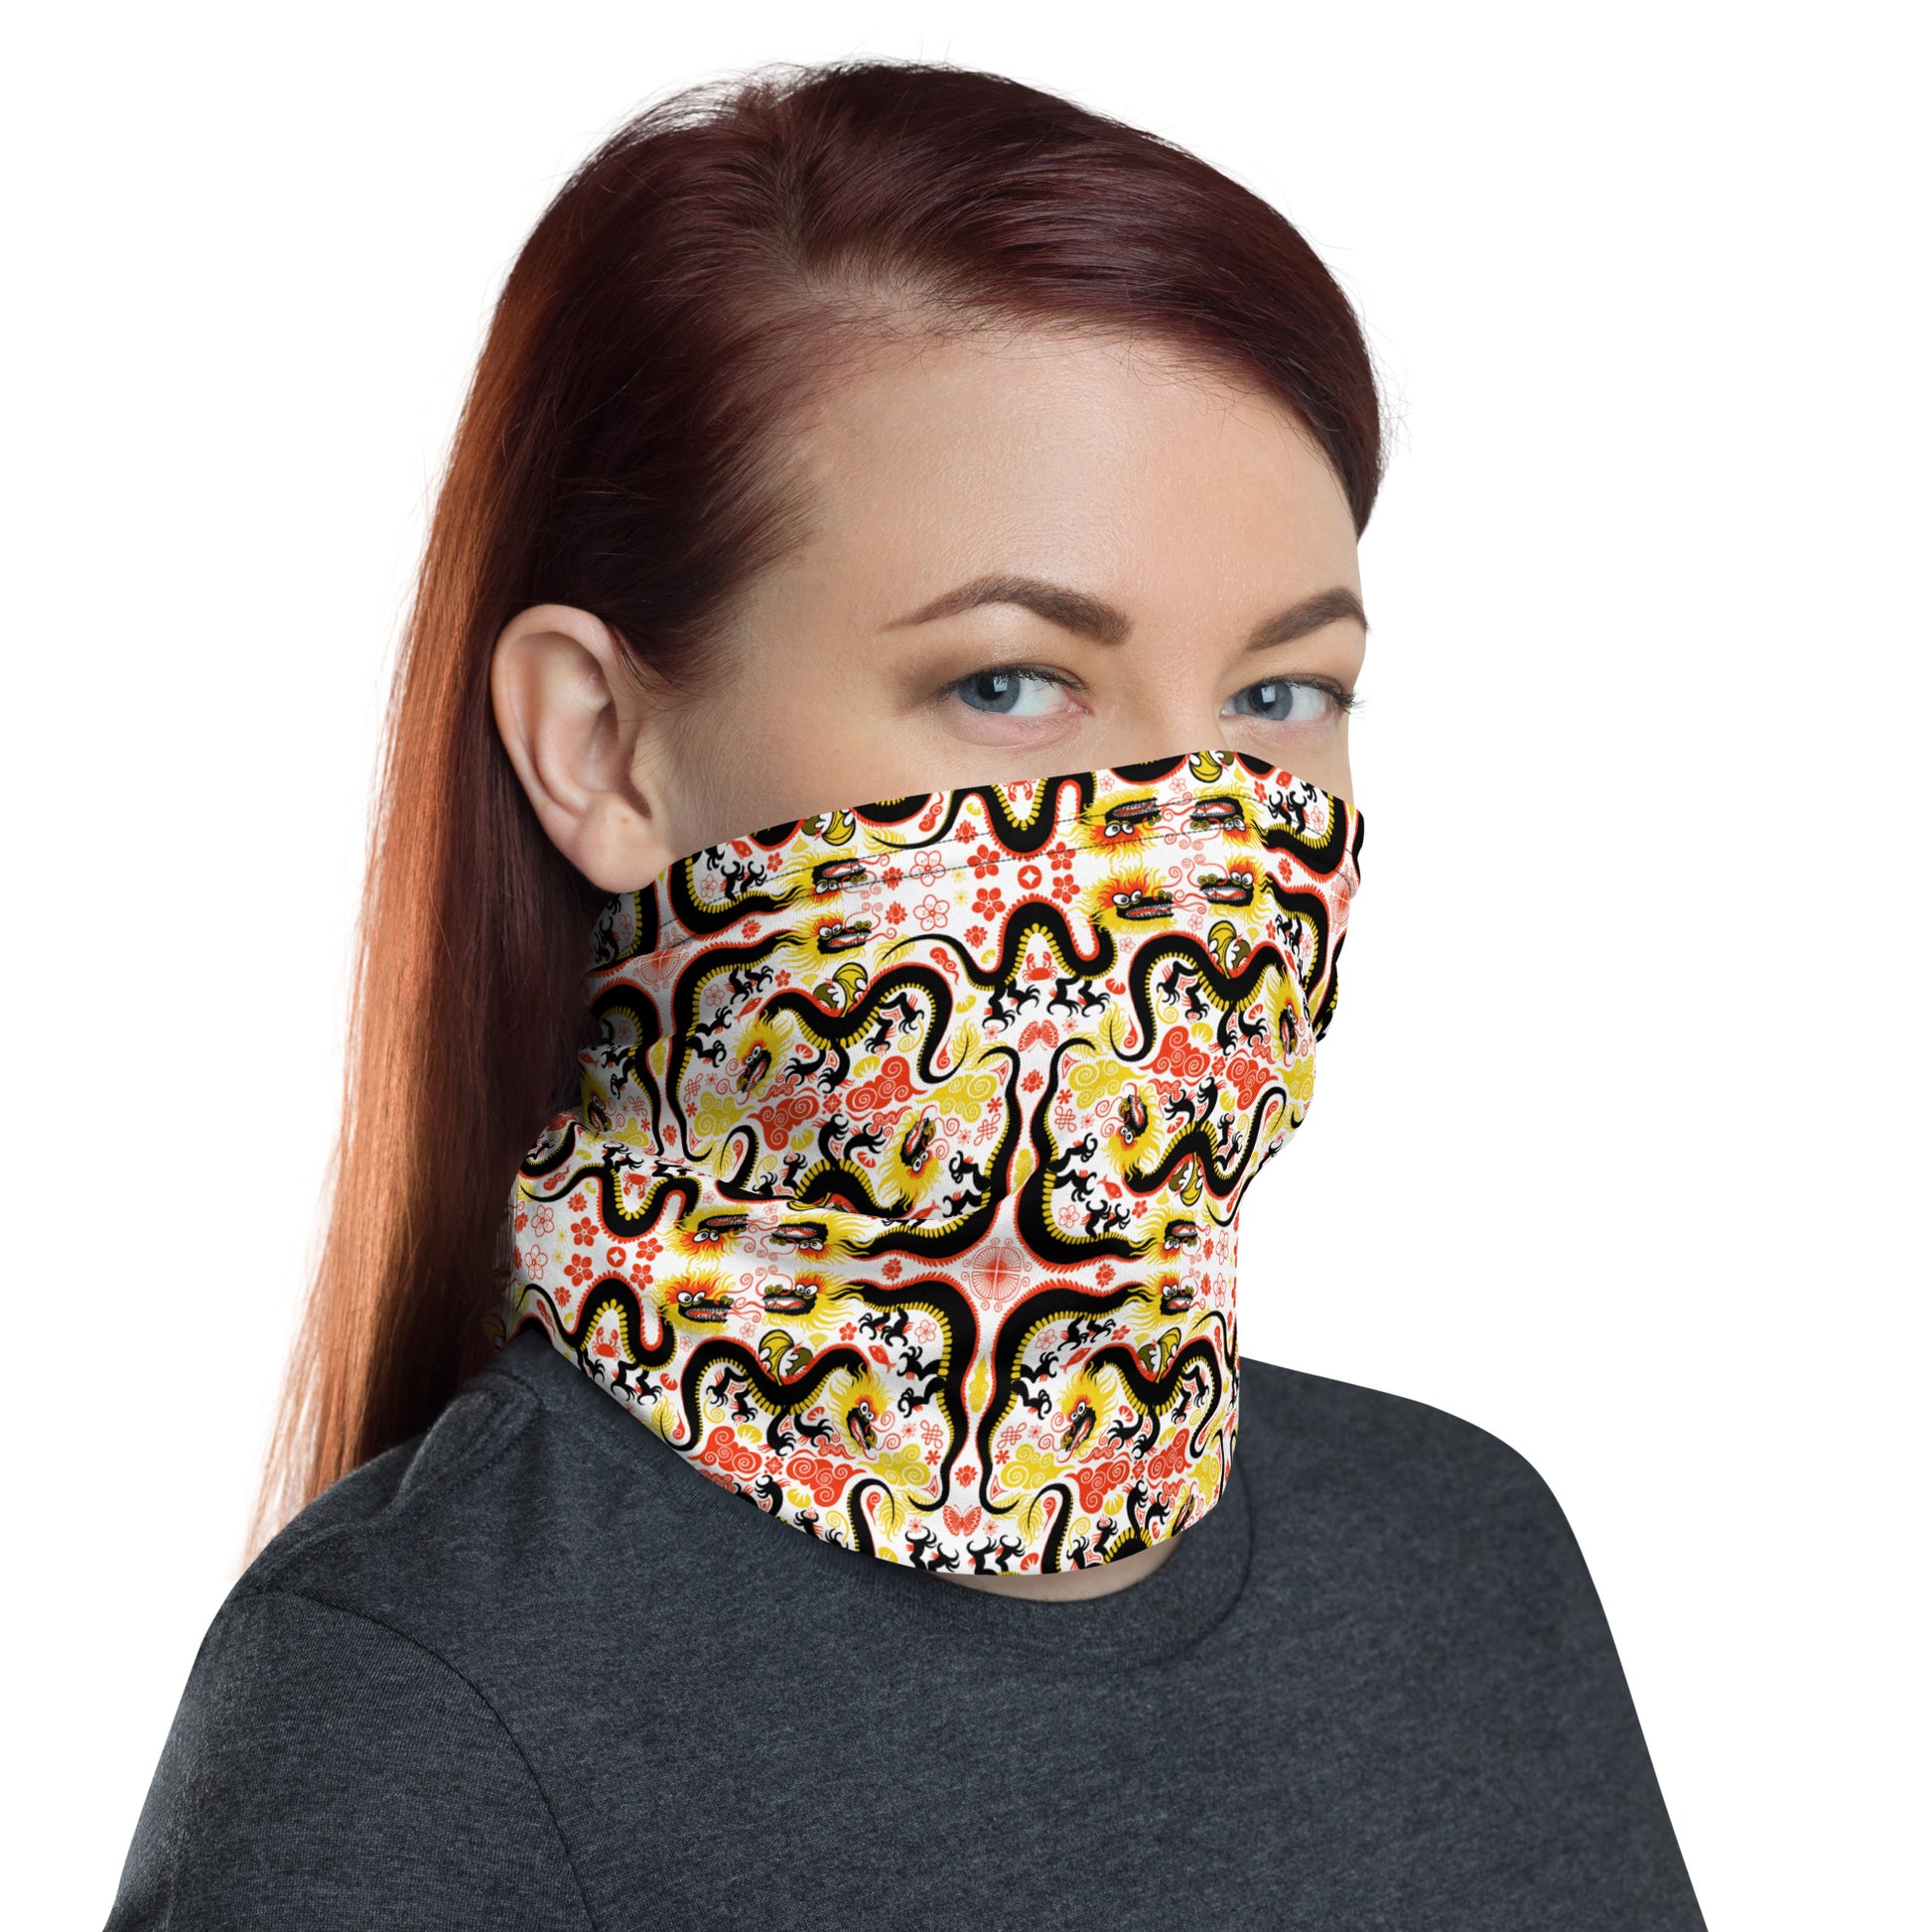 Red-haired woman wearing Neck Gaiter All-over printed with Legendary Chinese dragons pattern art. Neck warmer